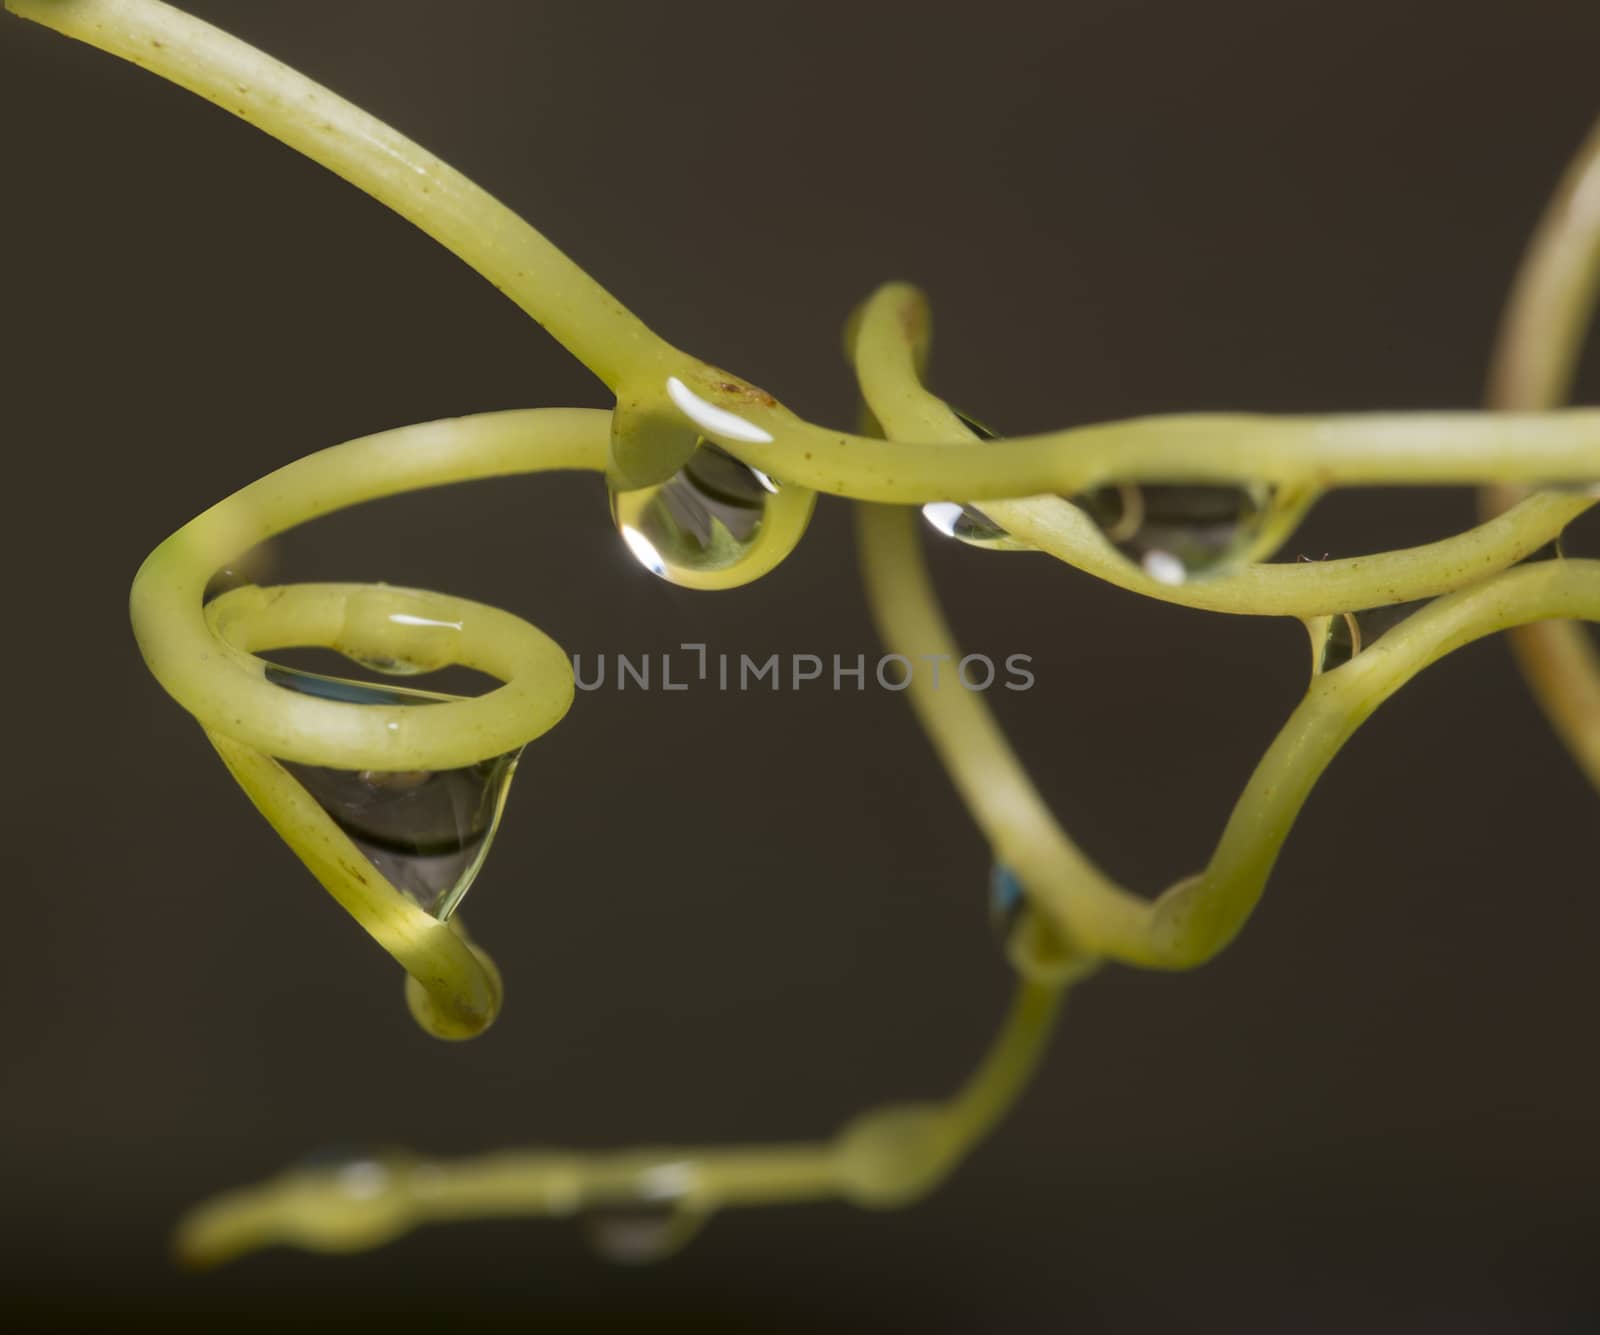 waterdrops catch by grapevines by compuinfoto